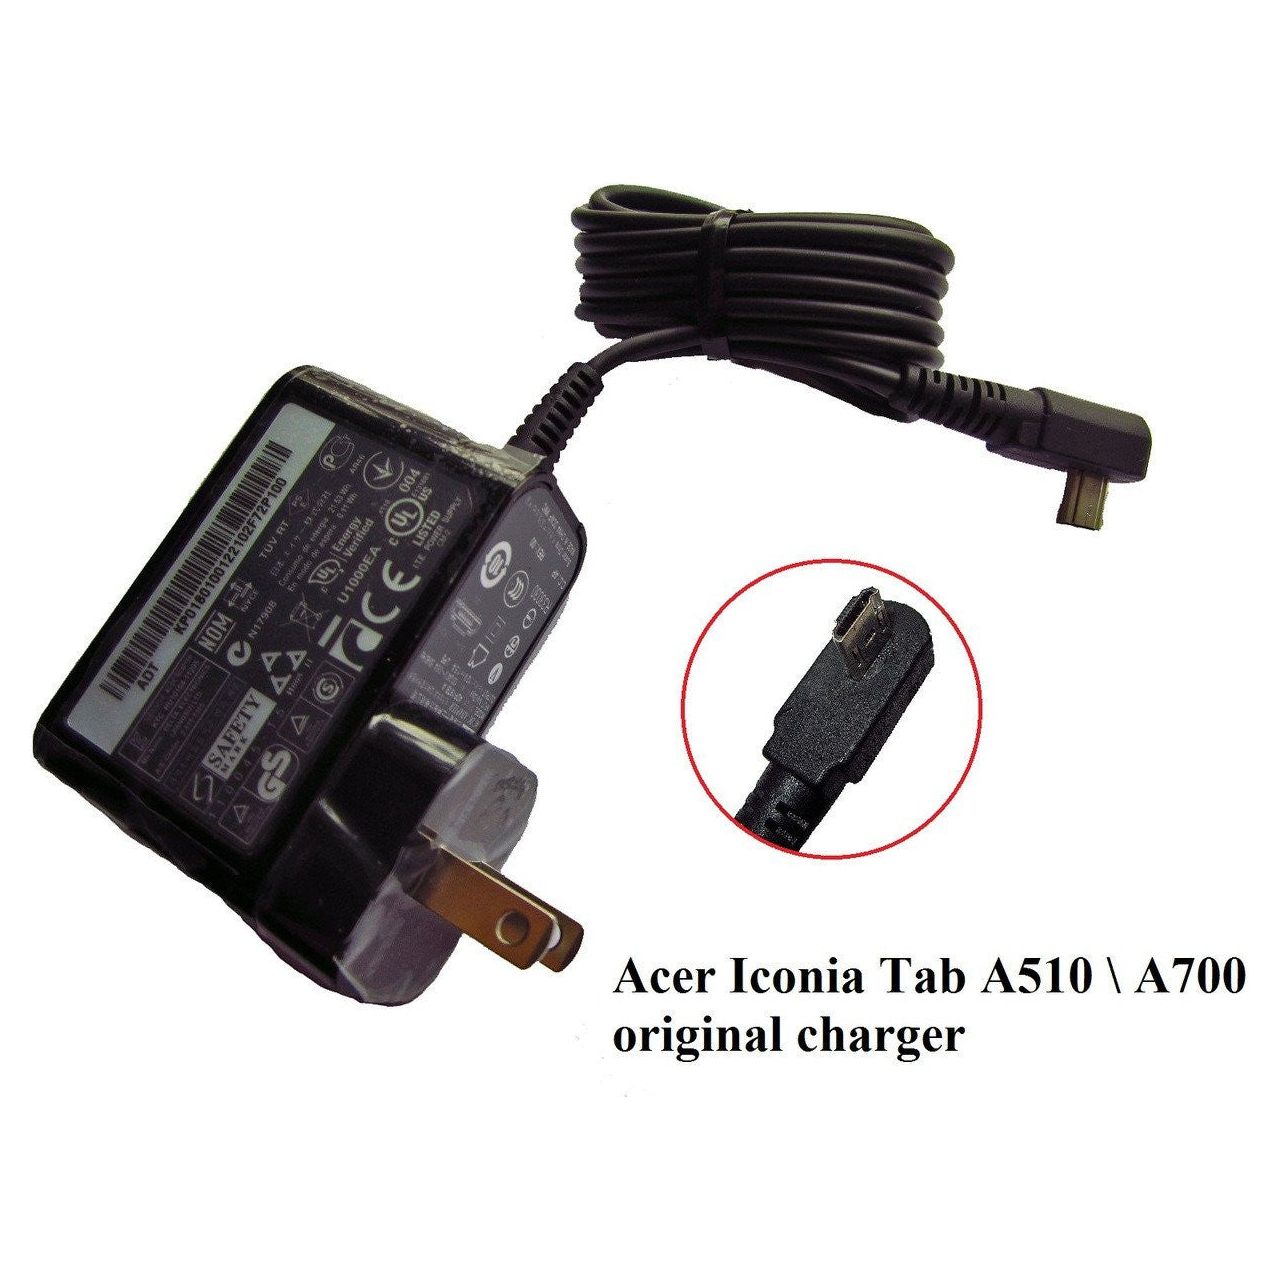 New Compatible Acer AC Adapter Charger KP.01801.001 KP.01801.002 KP.01807.001 18W